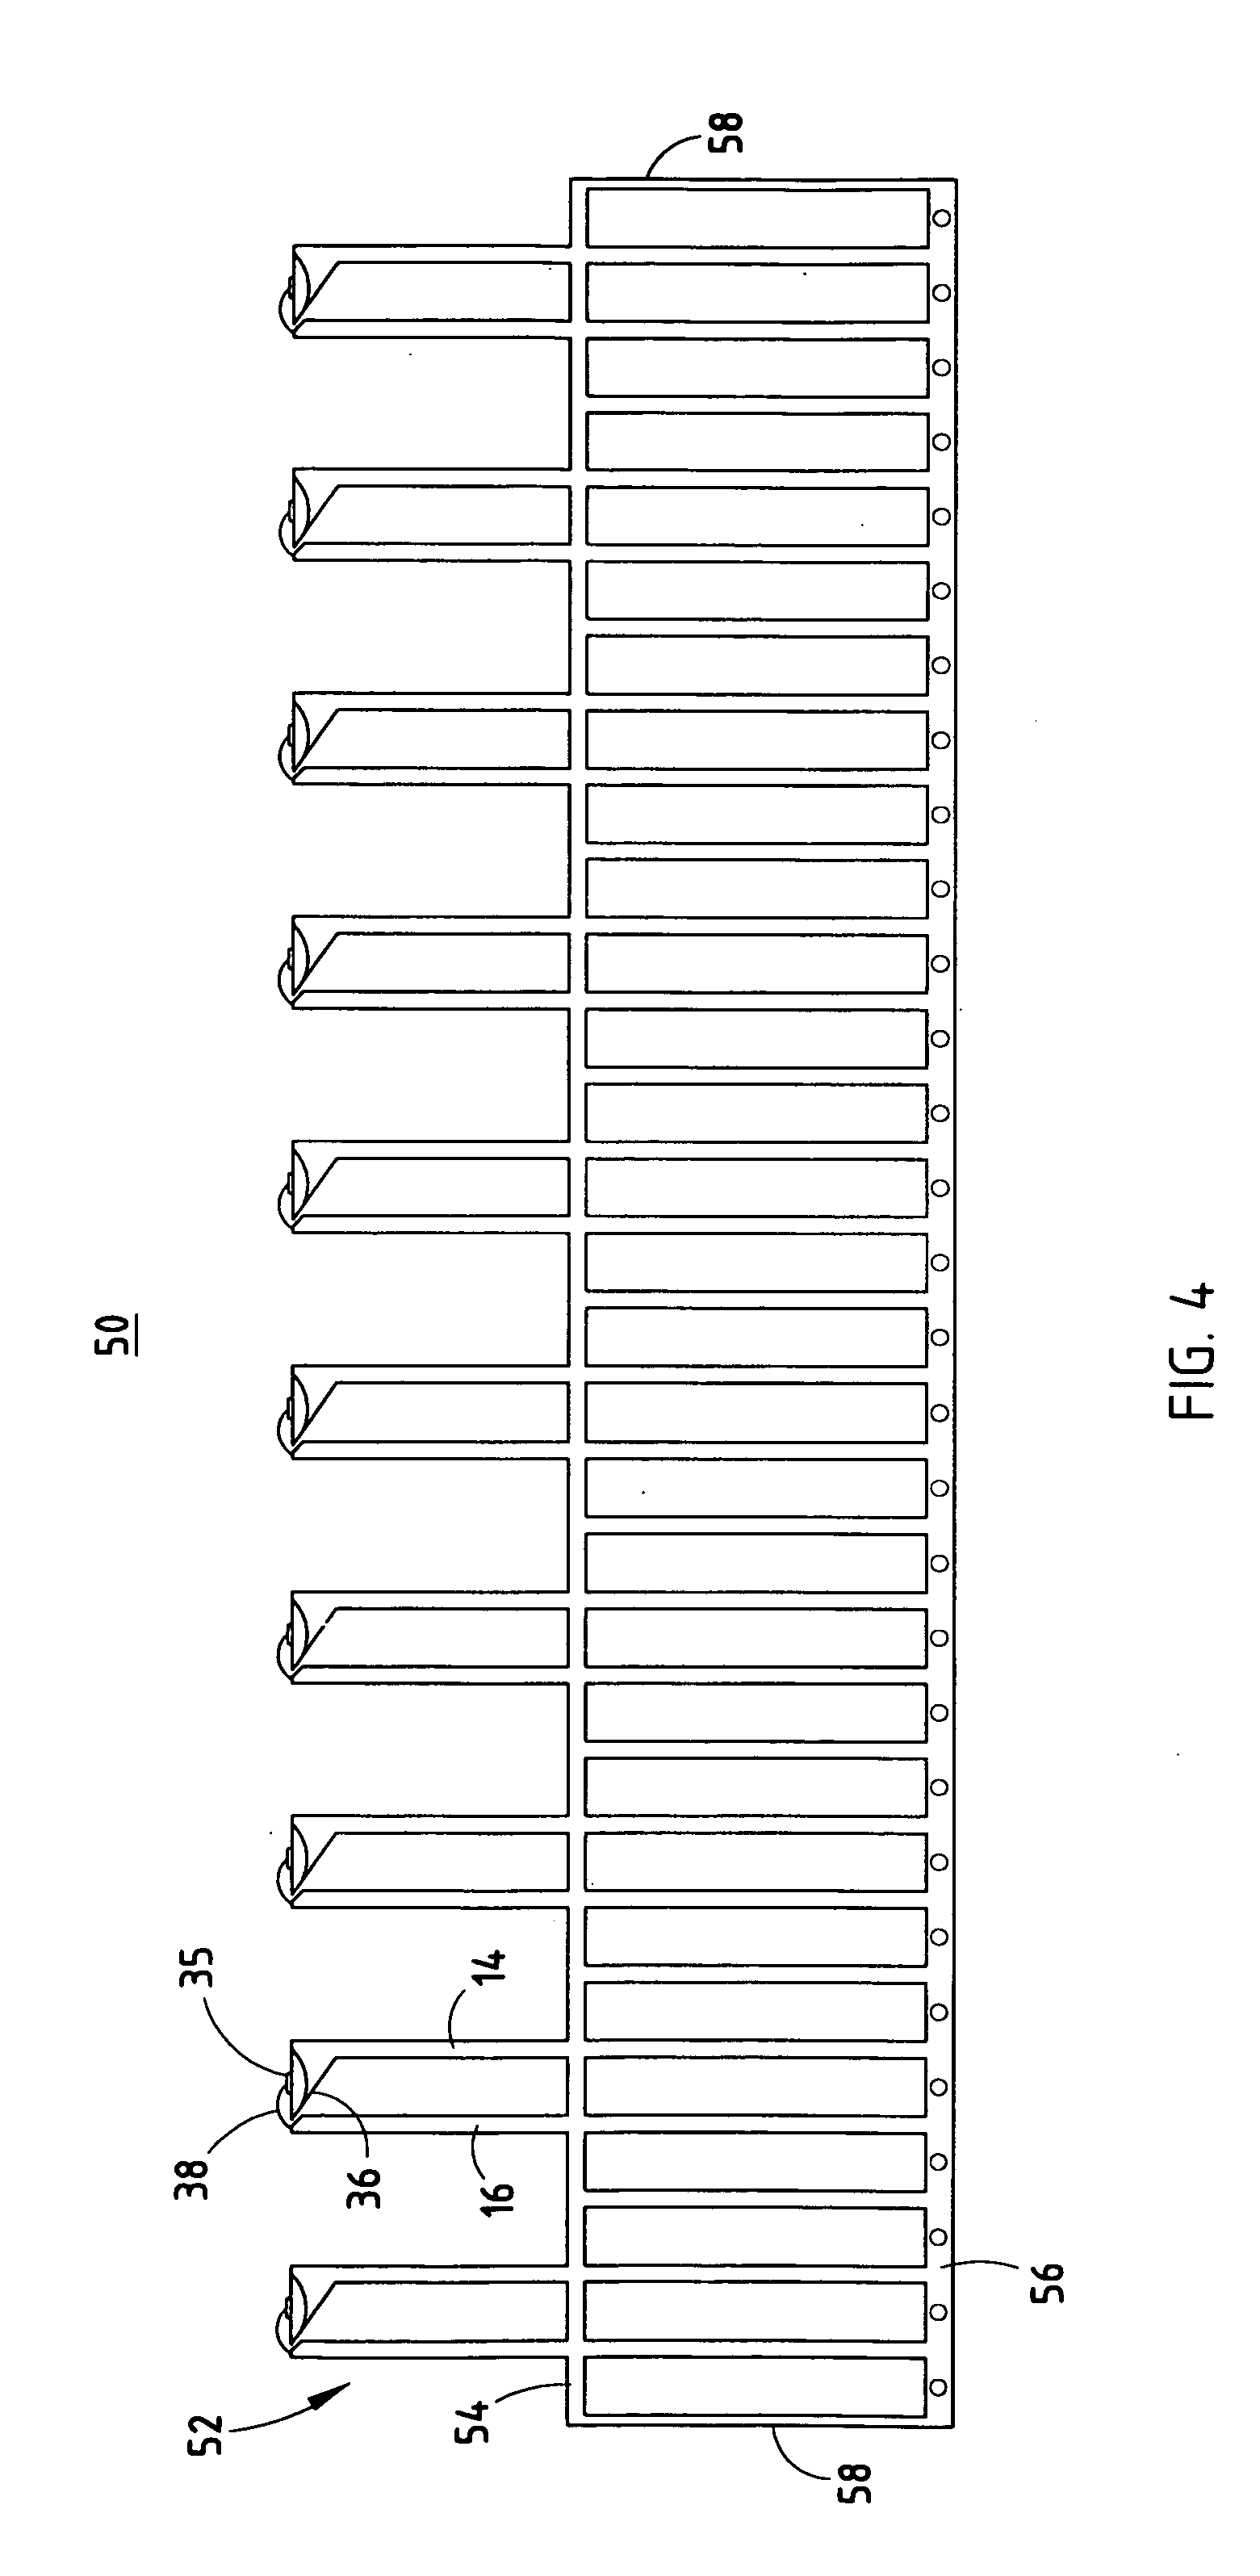 Opto-electronic assembly having an encapsulant with at least two different functional zones